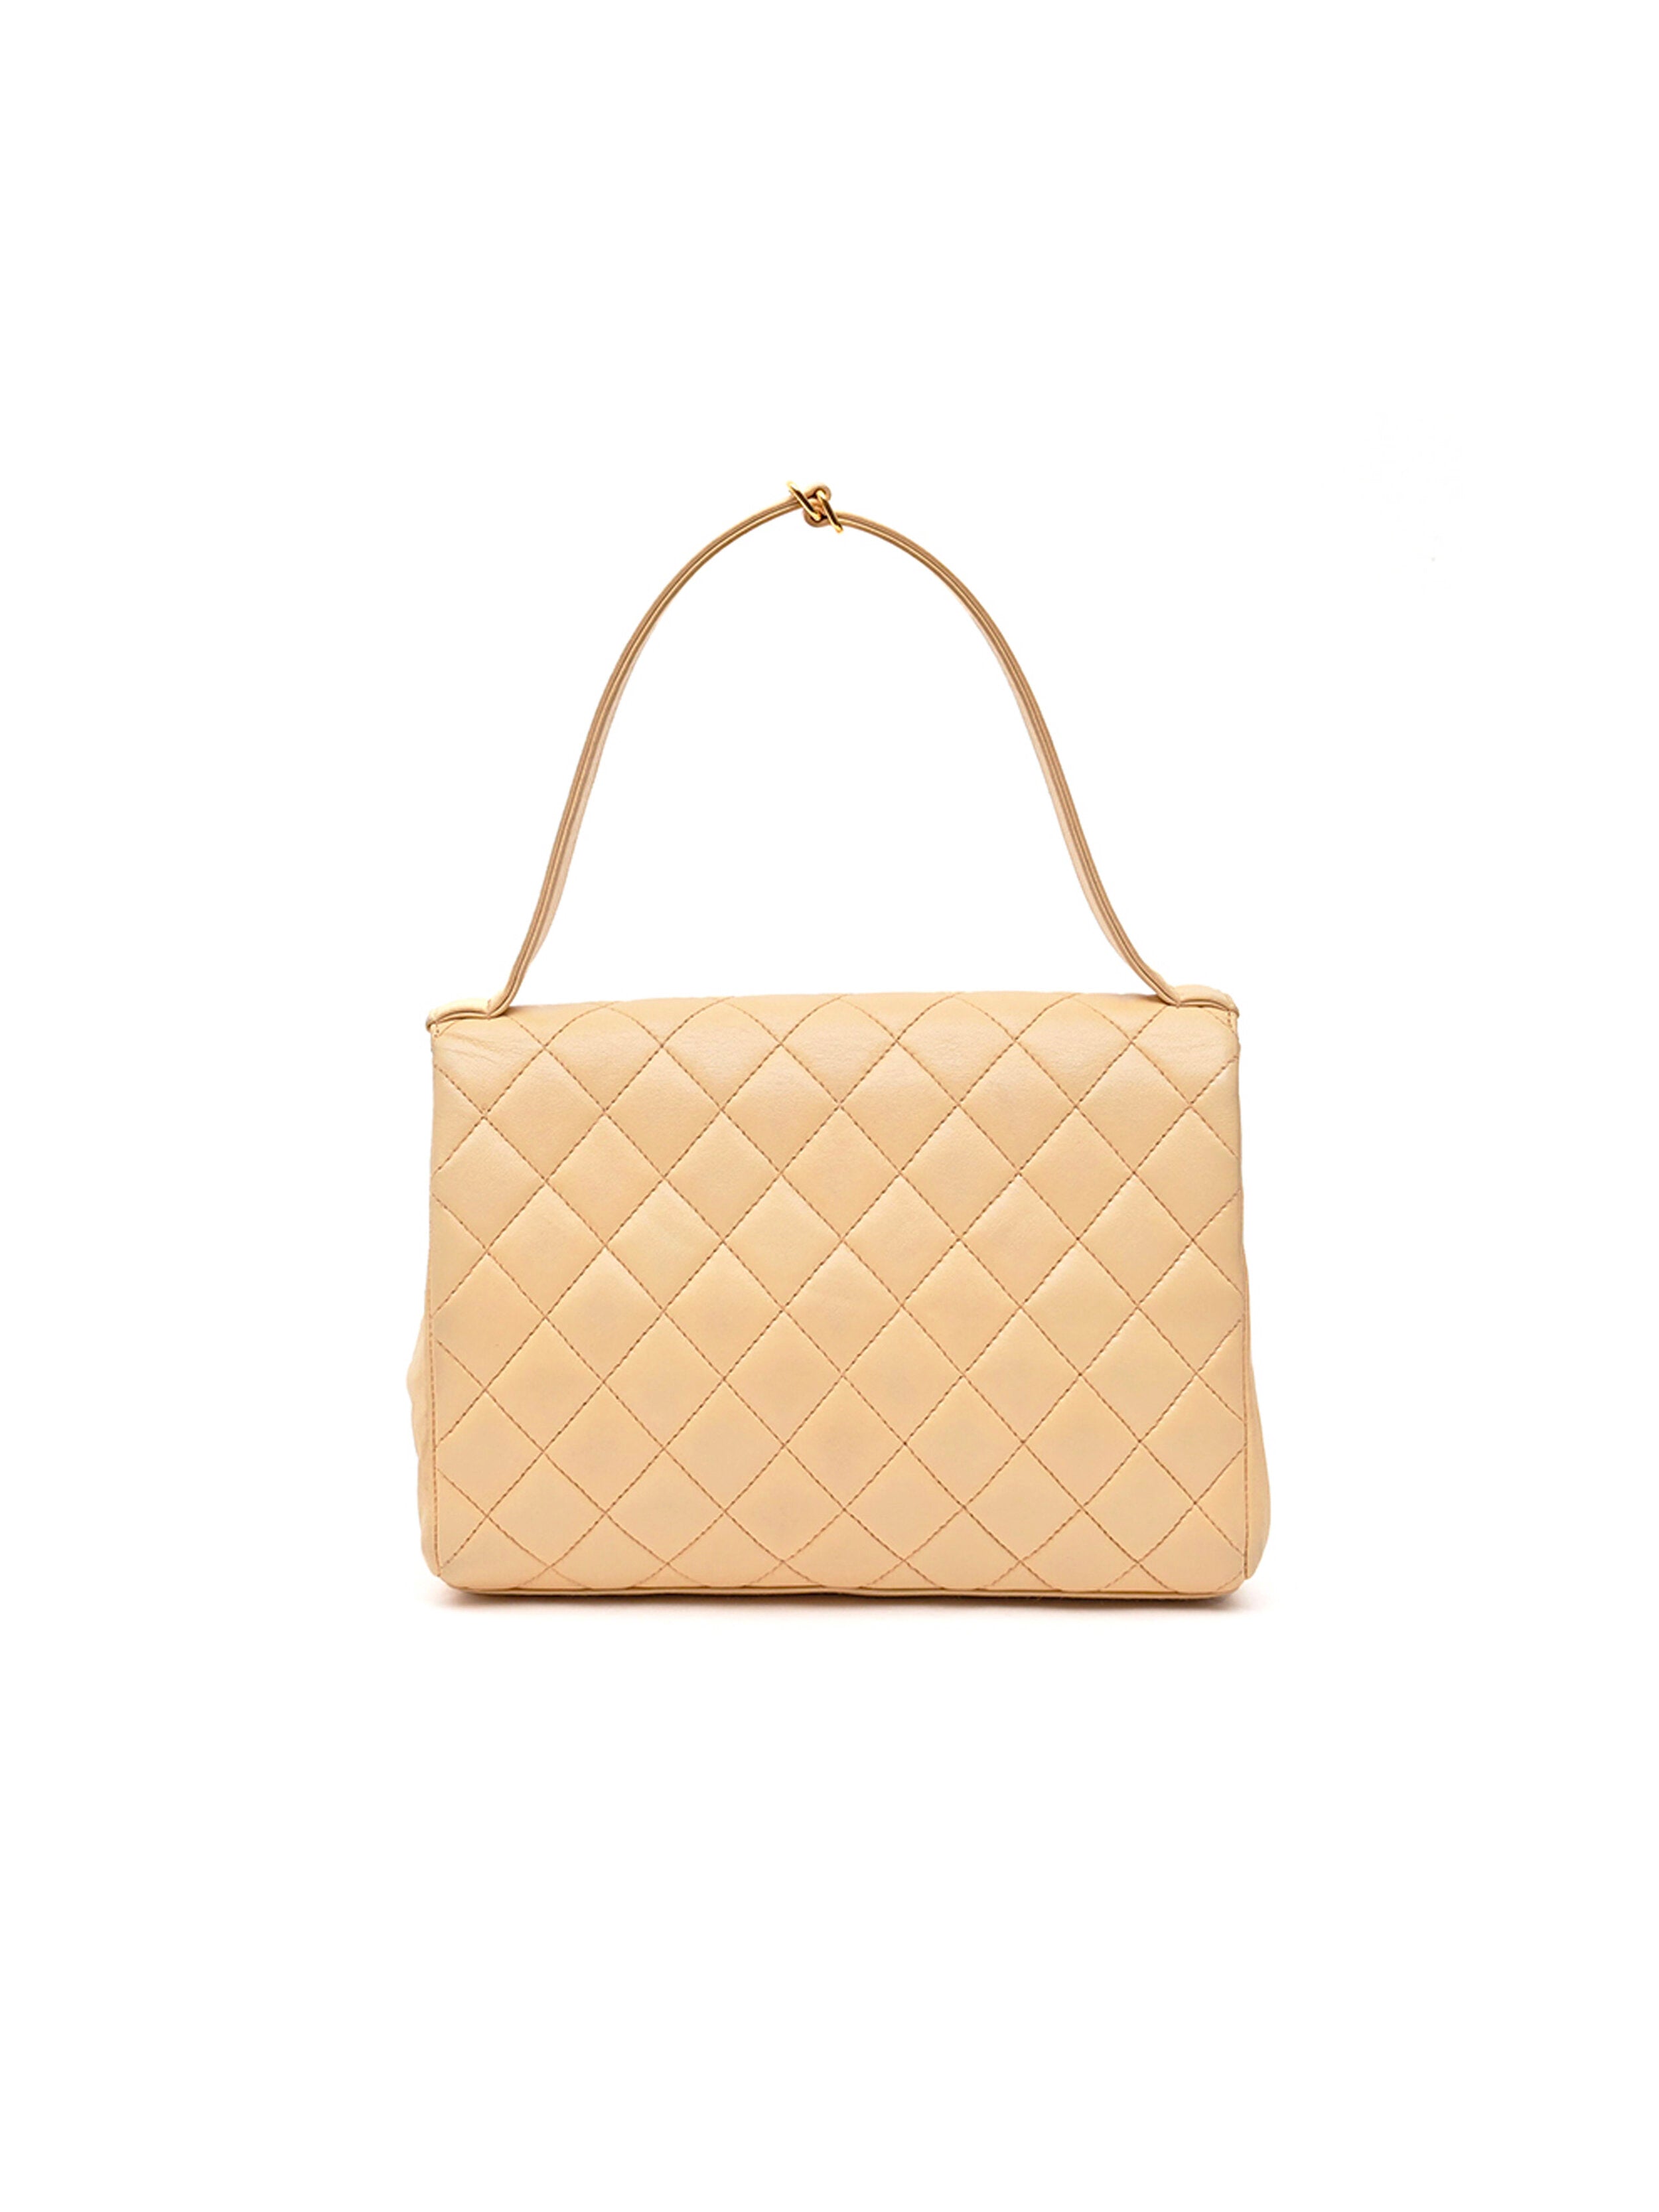 Chanel Nude Caviar Leather Quilted Medium Coco Handle Kelly Style